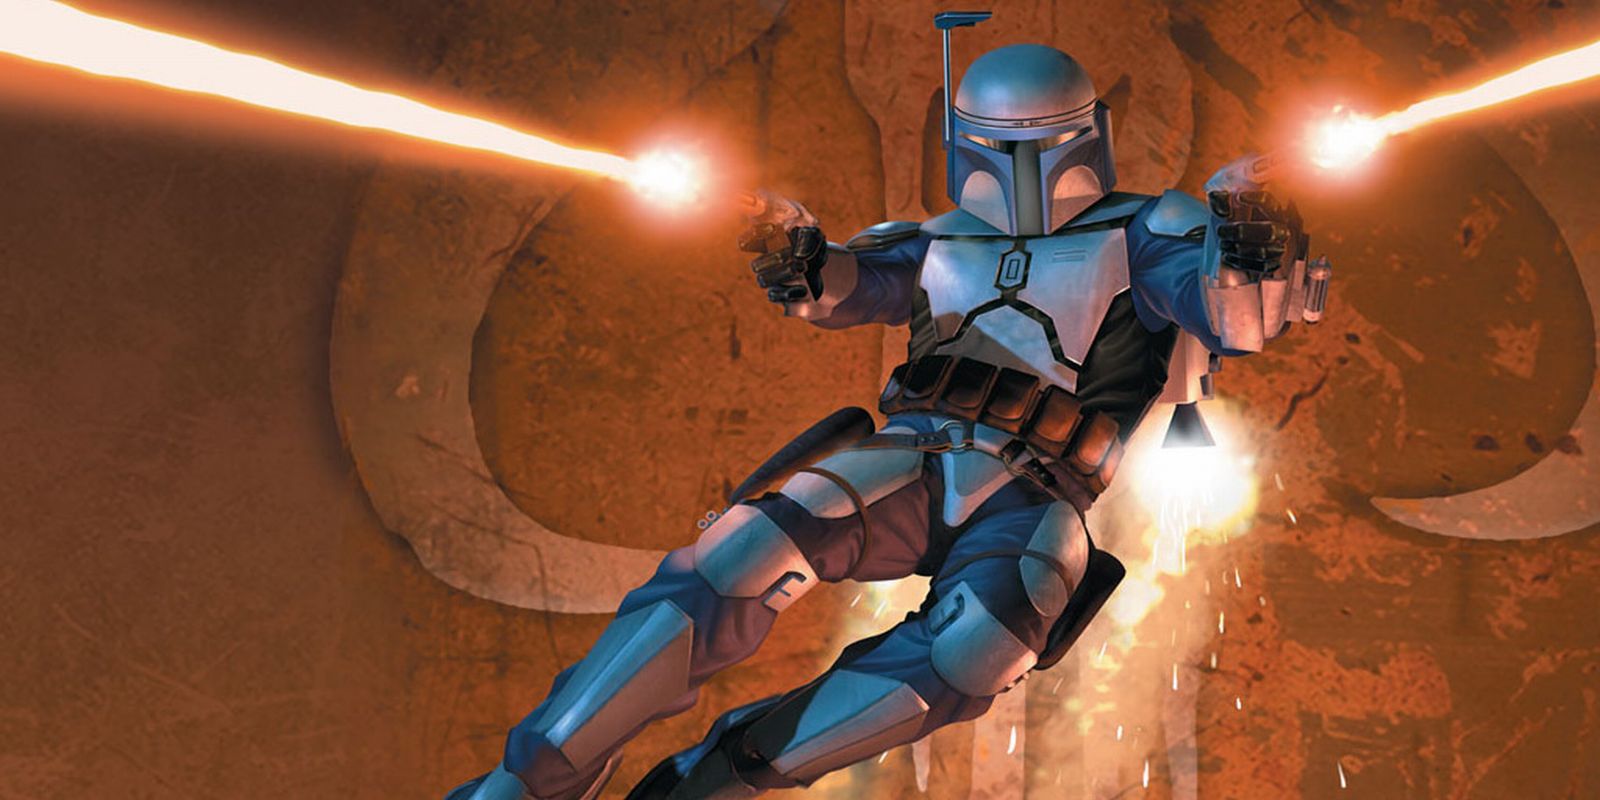 Jango Fett wearing a full-body suit of armor, shooting two blaster pistols, while using a jetpack.